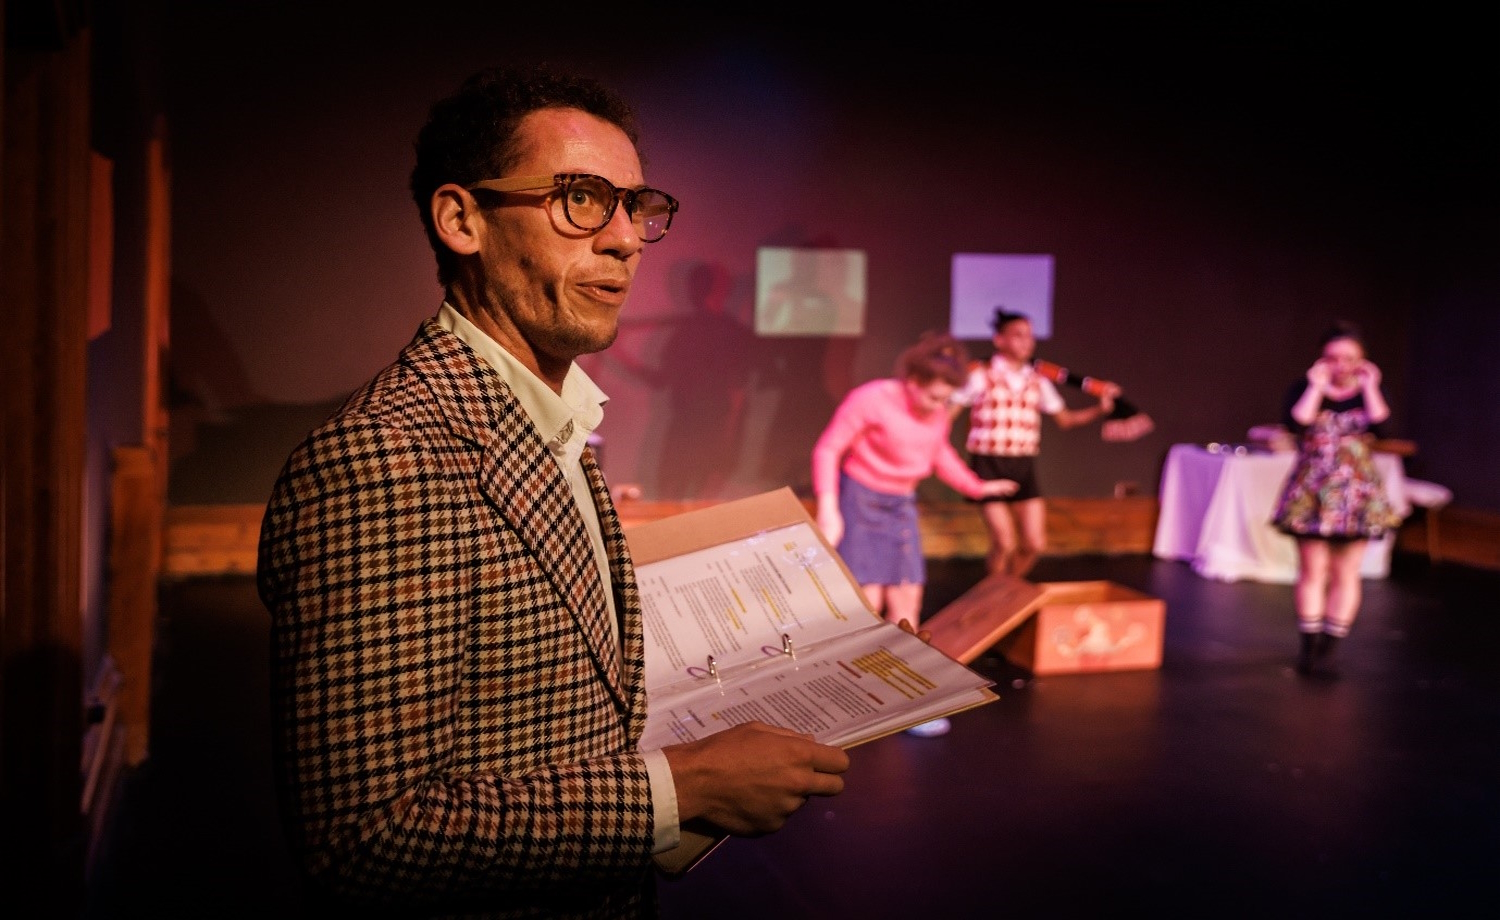 VV's audio describer Josh Lynzaat stands on stage wearing a tweed jacket, glasses, holding open book with written descriptions. In background on stage also but out of focus, three young people perform. With permission from La Mama for Kids Meet the Grandies production directed by Amelia Burke. Photo by Darren Gill